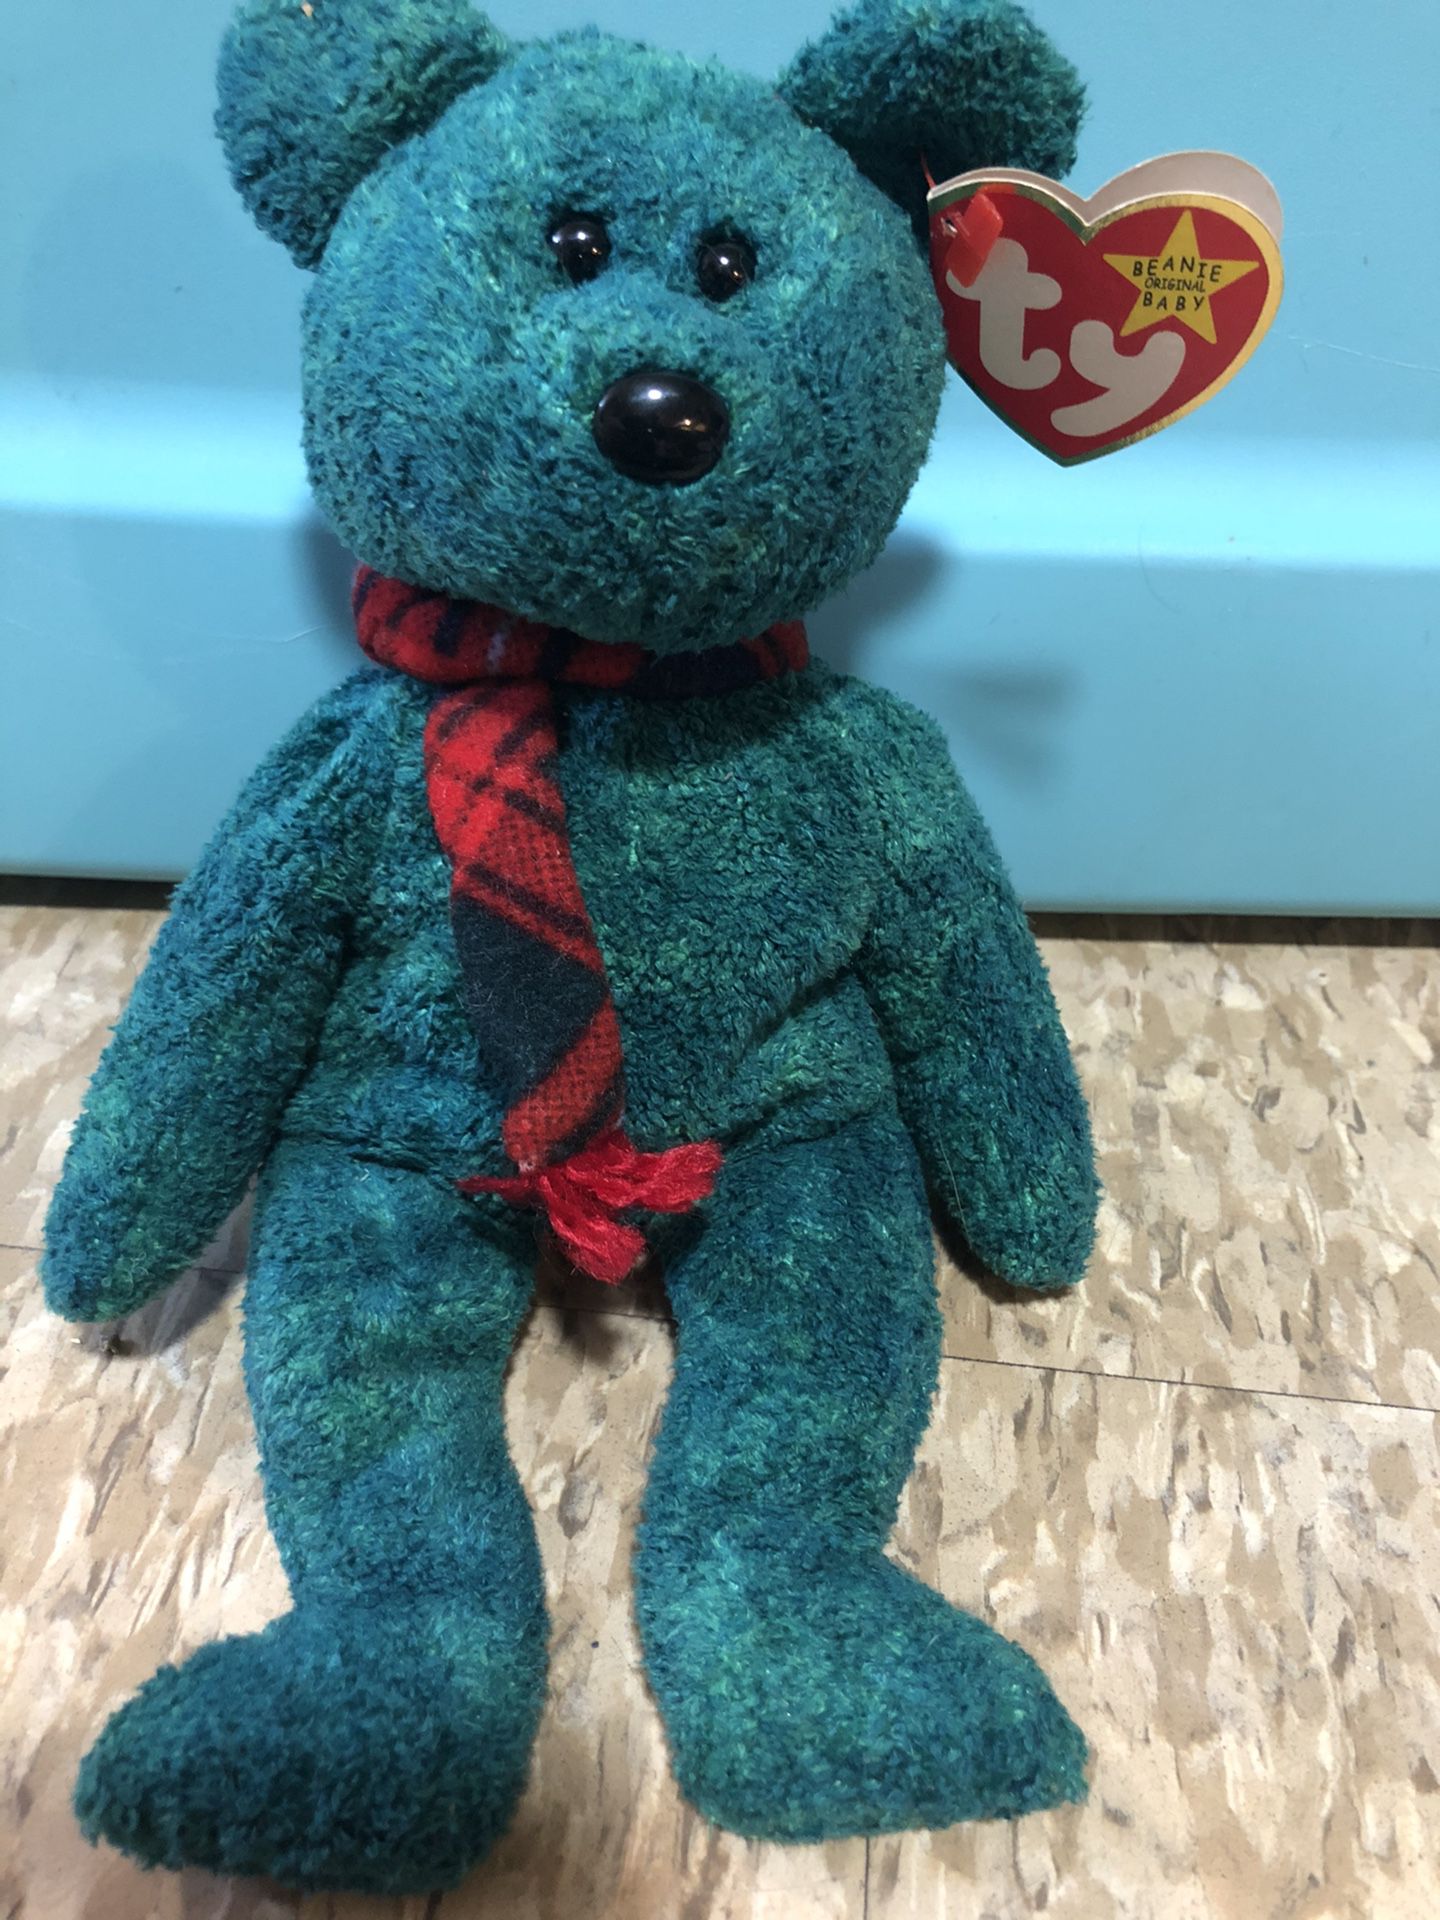 Beanie Baby “Wallace”